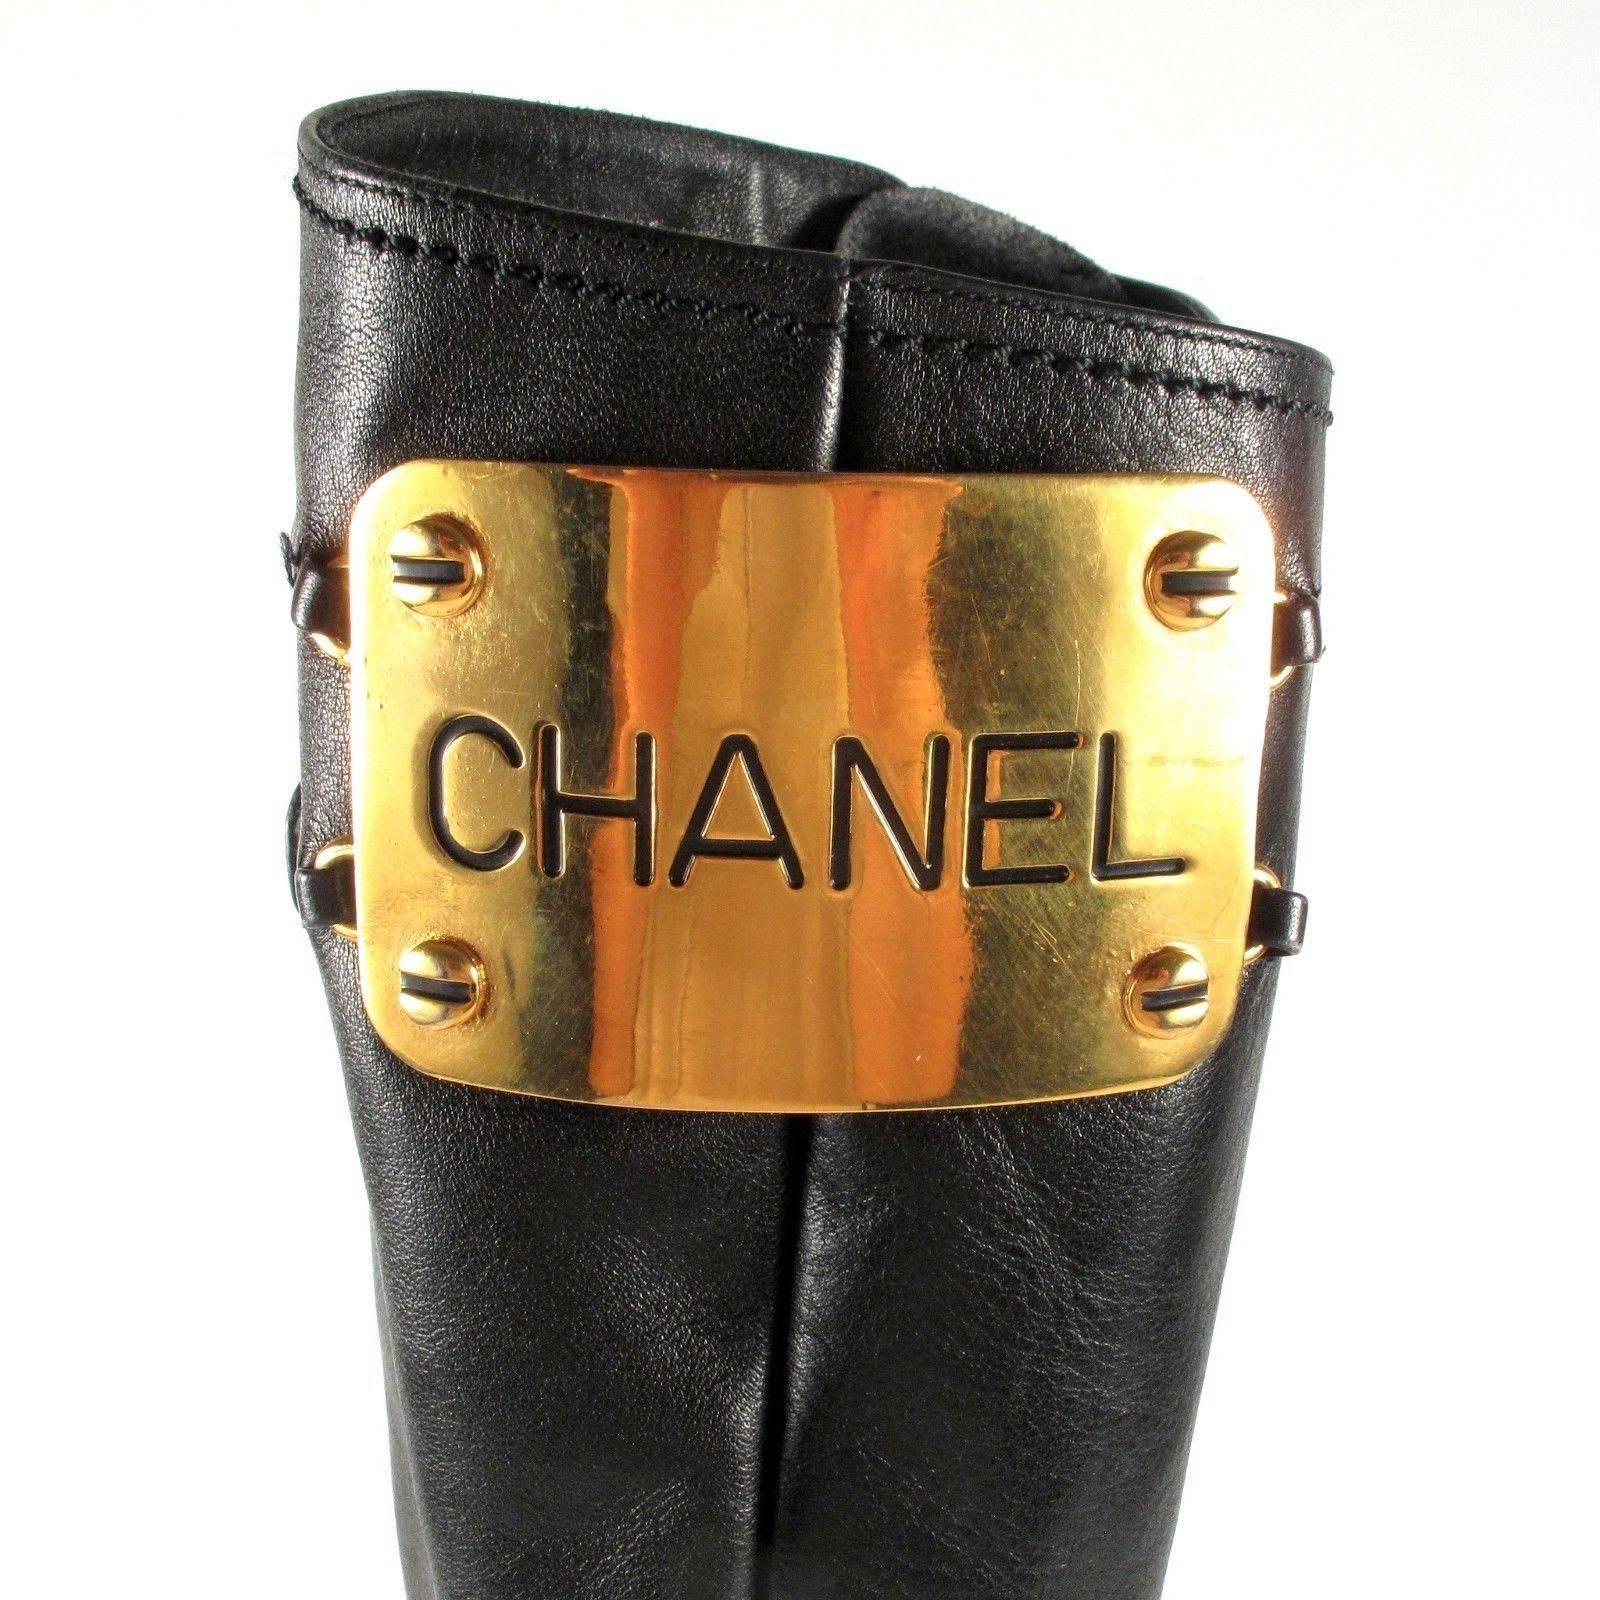 Chanel - Knee-High Combat Vintage Boots

These are the RAREST & most collectable Chanel boots ever made

the last pair sold for $6200.00

Size: US 8 - European 38

Color:  Black

Material: